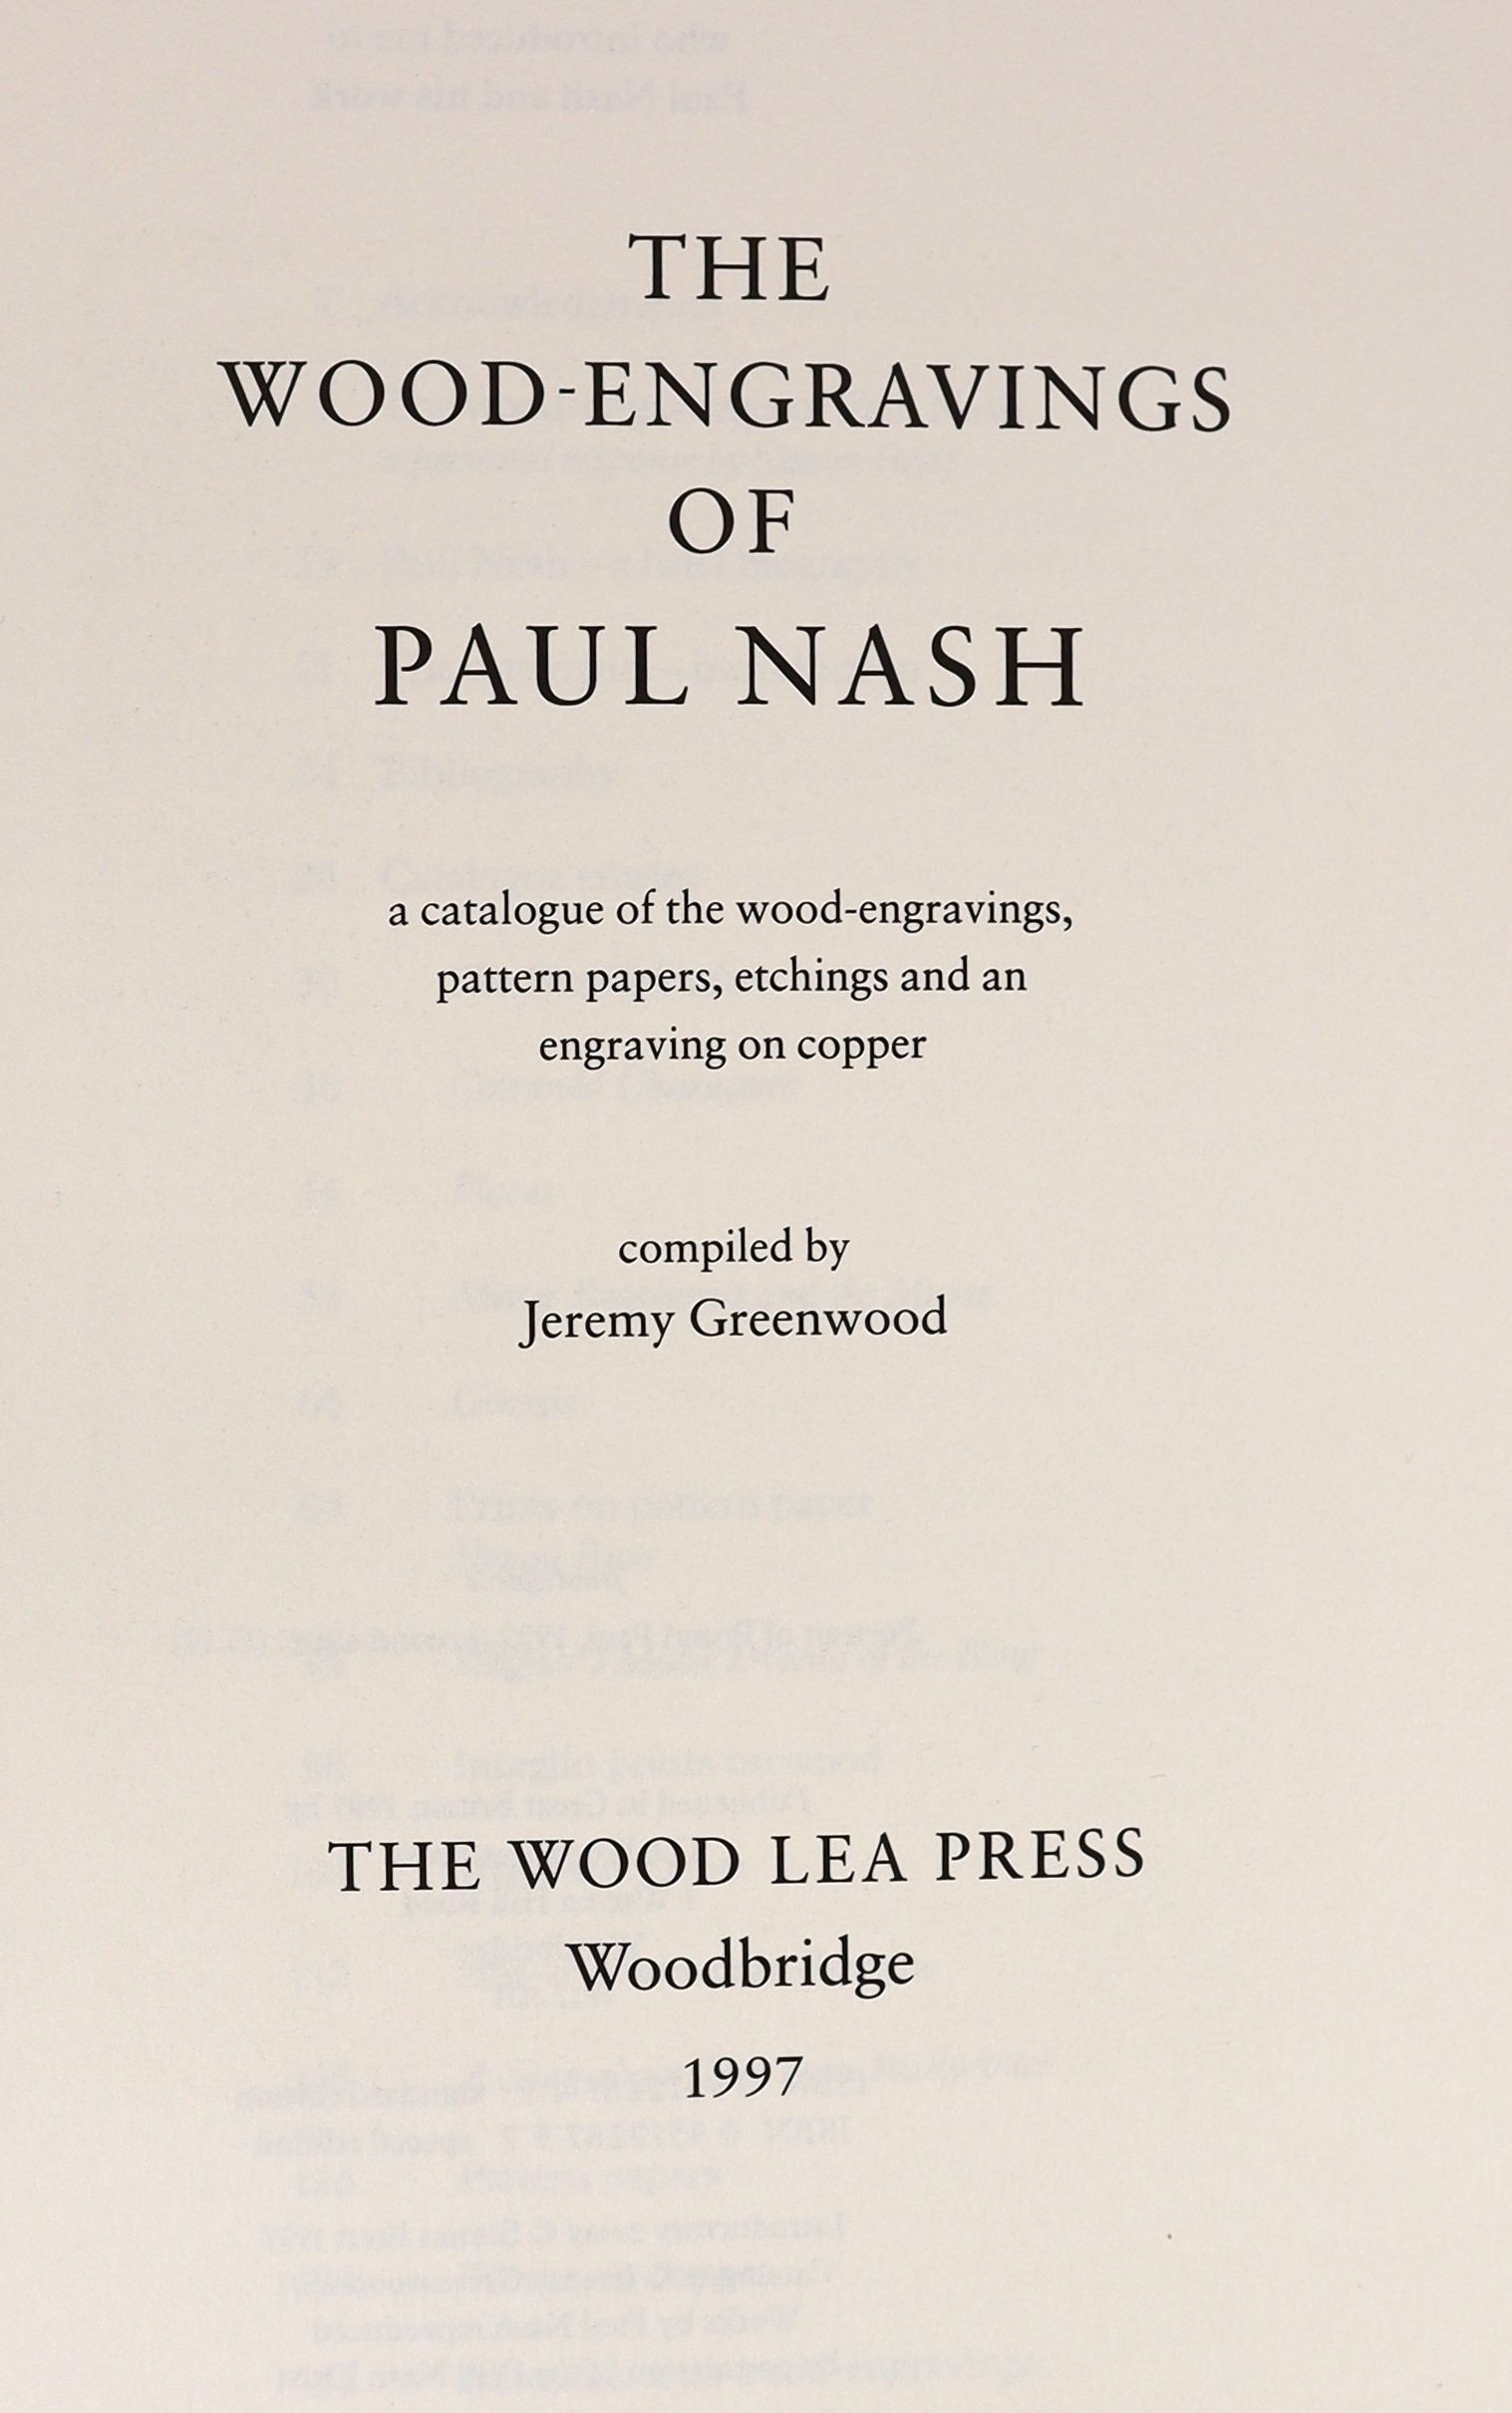 Nash, John [and] Greenwood, Jeremy - The Wood-Engravings of John Nash. Limited ed. one of 750. Adorned with numerous text illustrations, some of which being coloured and tipped-in and many full page. Quarter cloth and pr